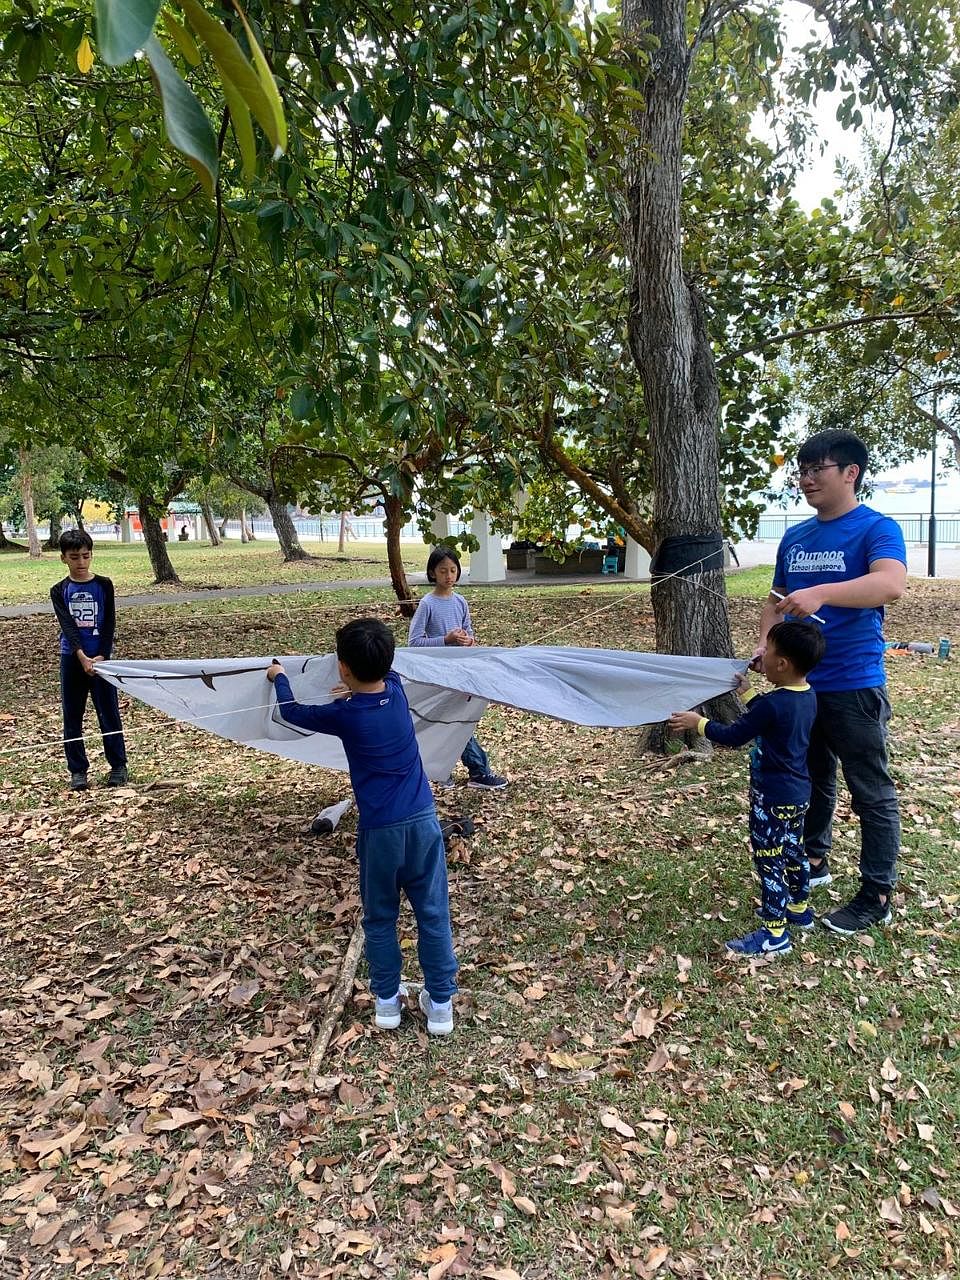 Children learning to set up a tent before Covid-19 as part of Outdoor School Singapore's Tall Timber programme. Mr Glen Poh, who teaches wilderness survival courses, building a shelter with sticks. Ms Gina Pang, Mr Raymond Seow and their sons Ethan (